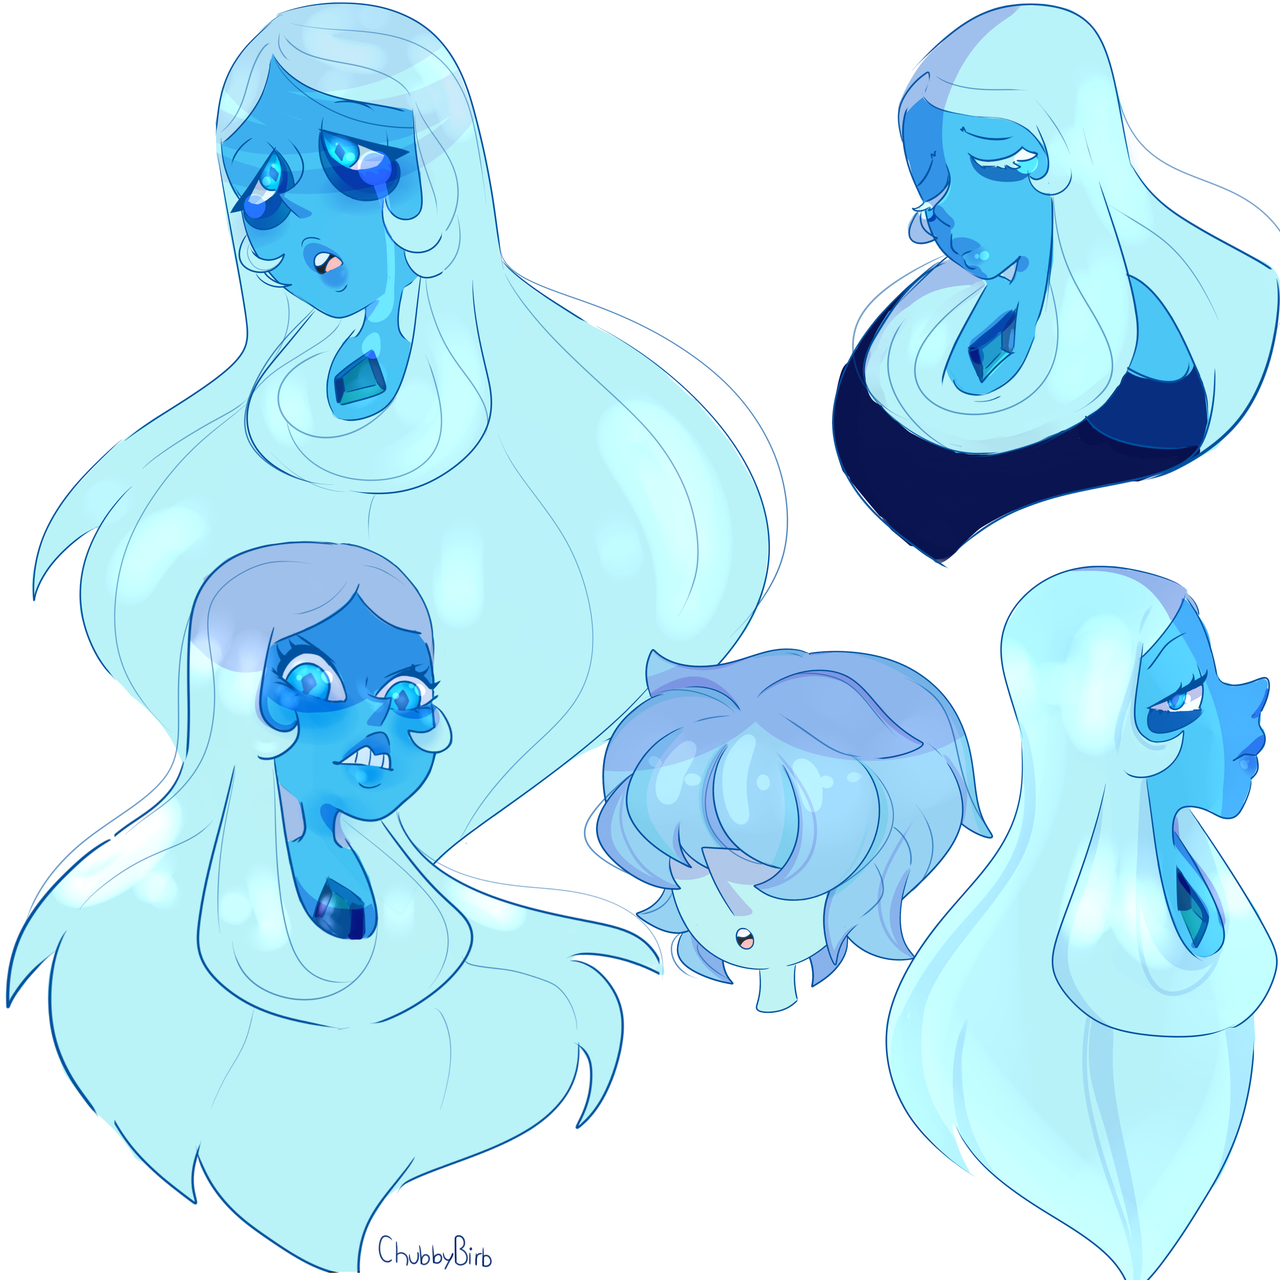 A bunch of Blue doodles and a pearl